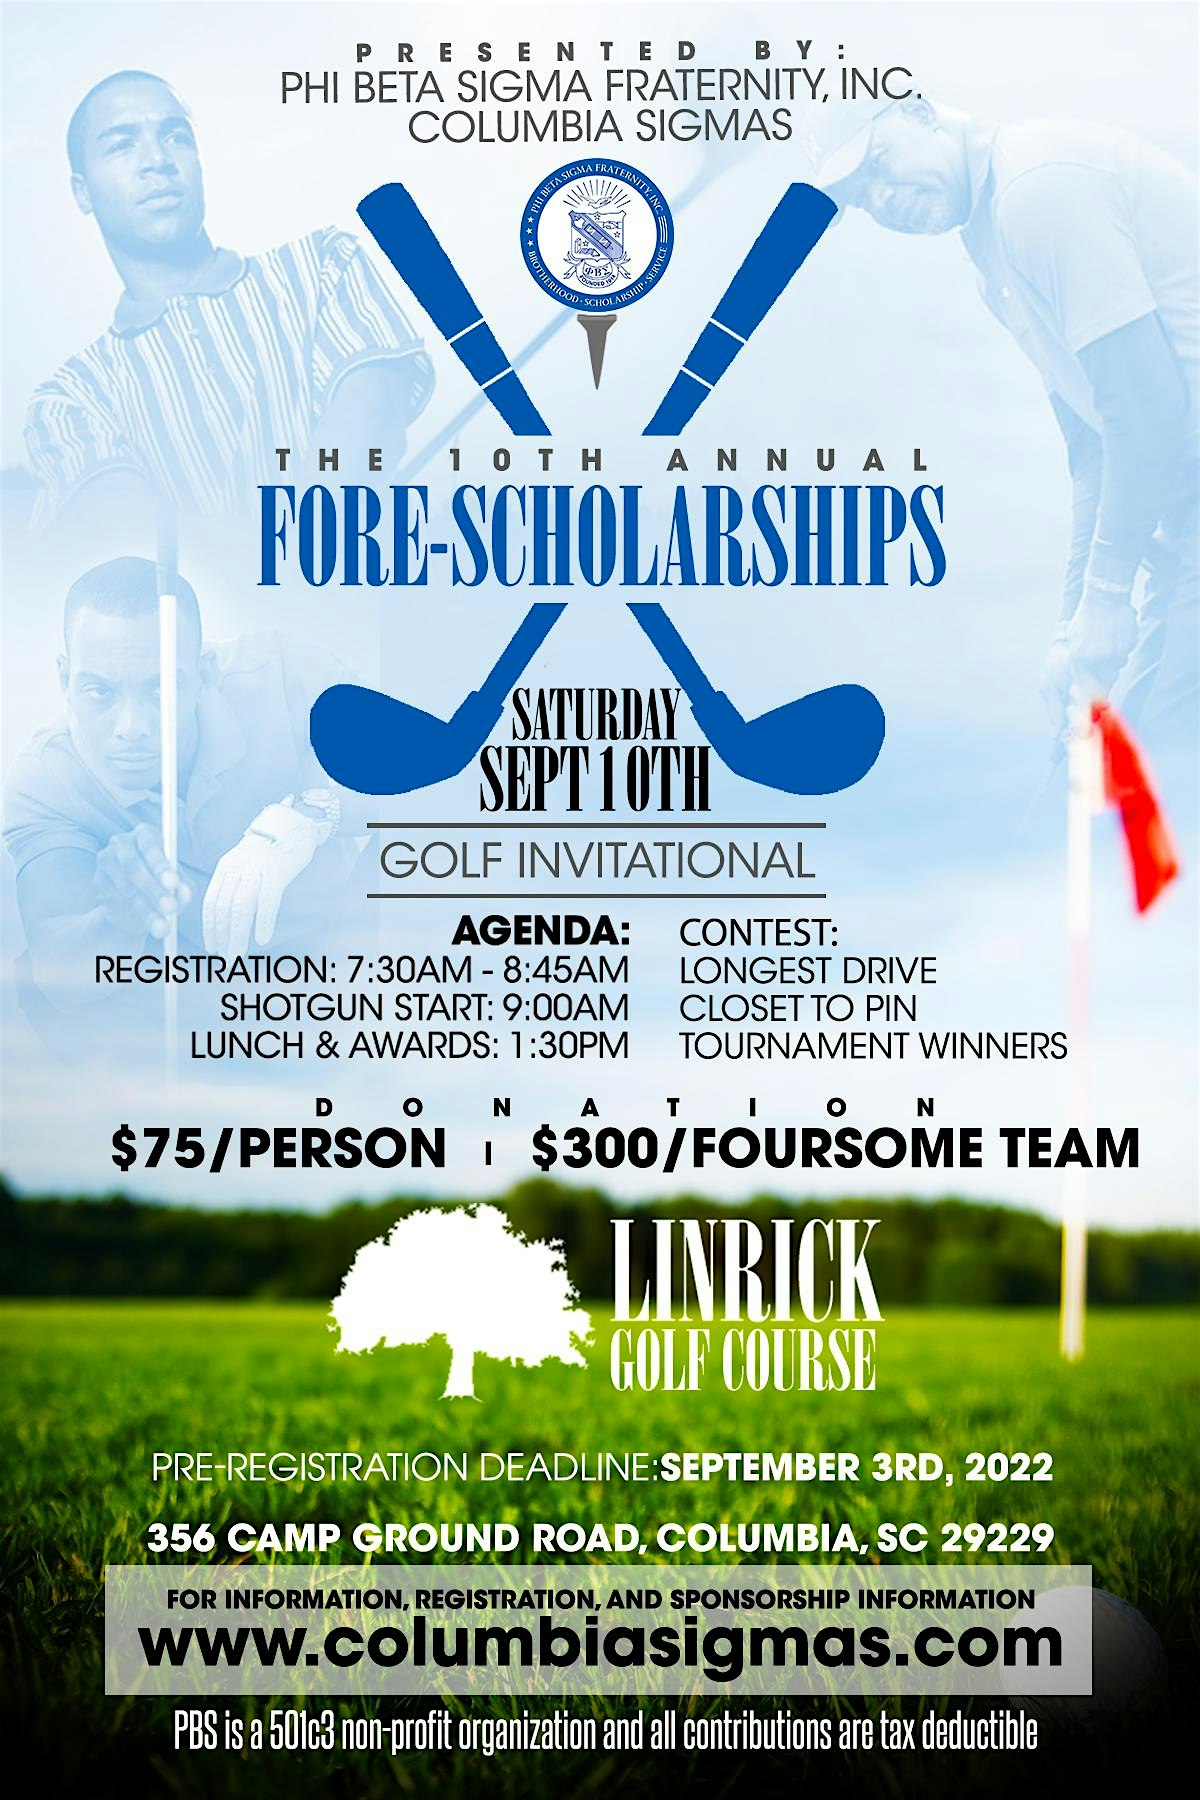 10th Annual FORE-SCHOLARSHIPS GOLF INVITATIONAL